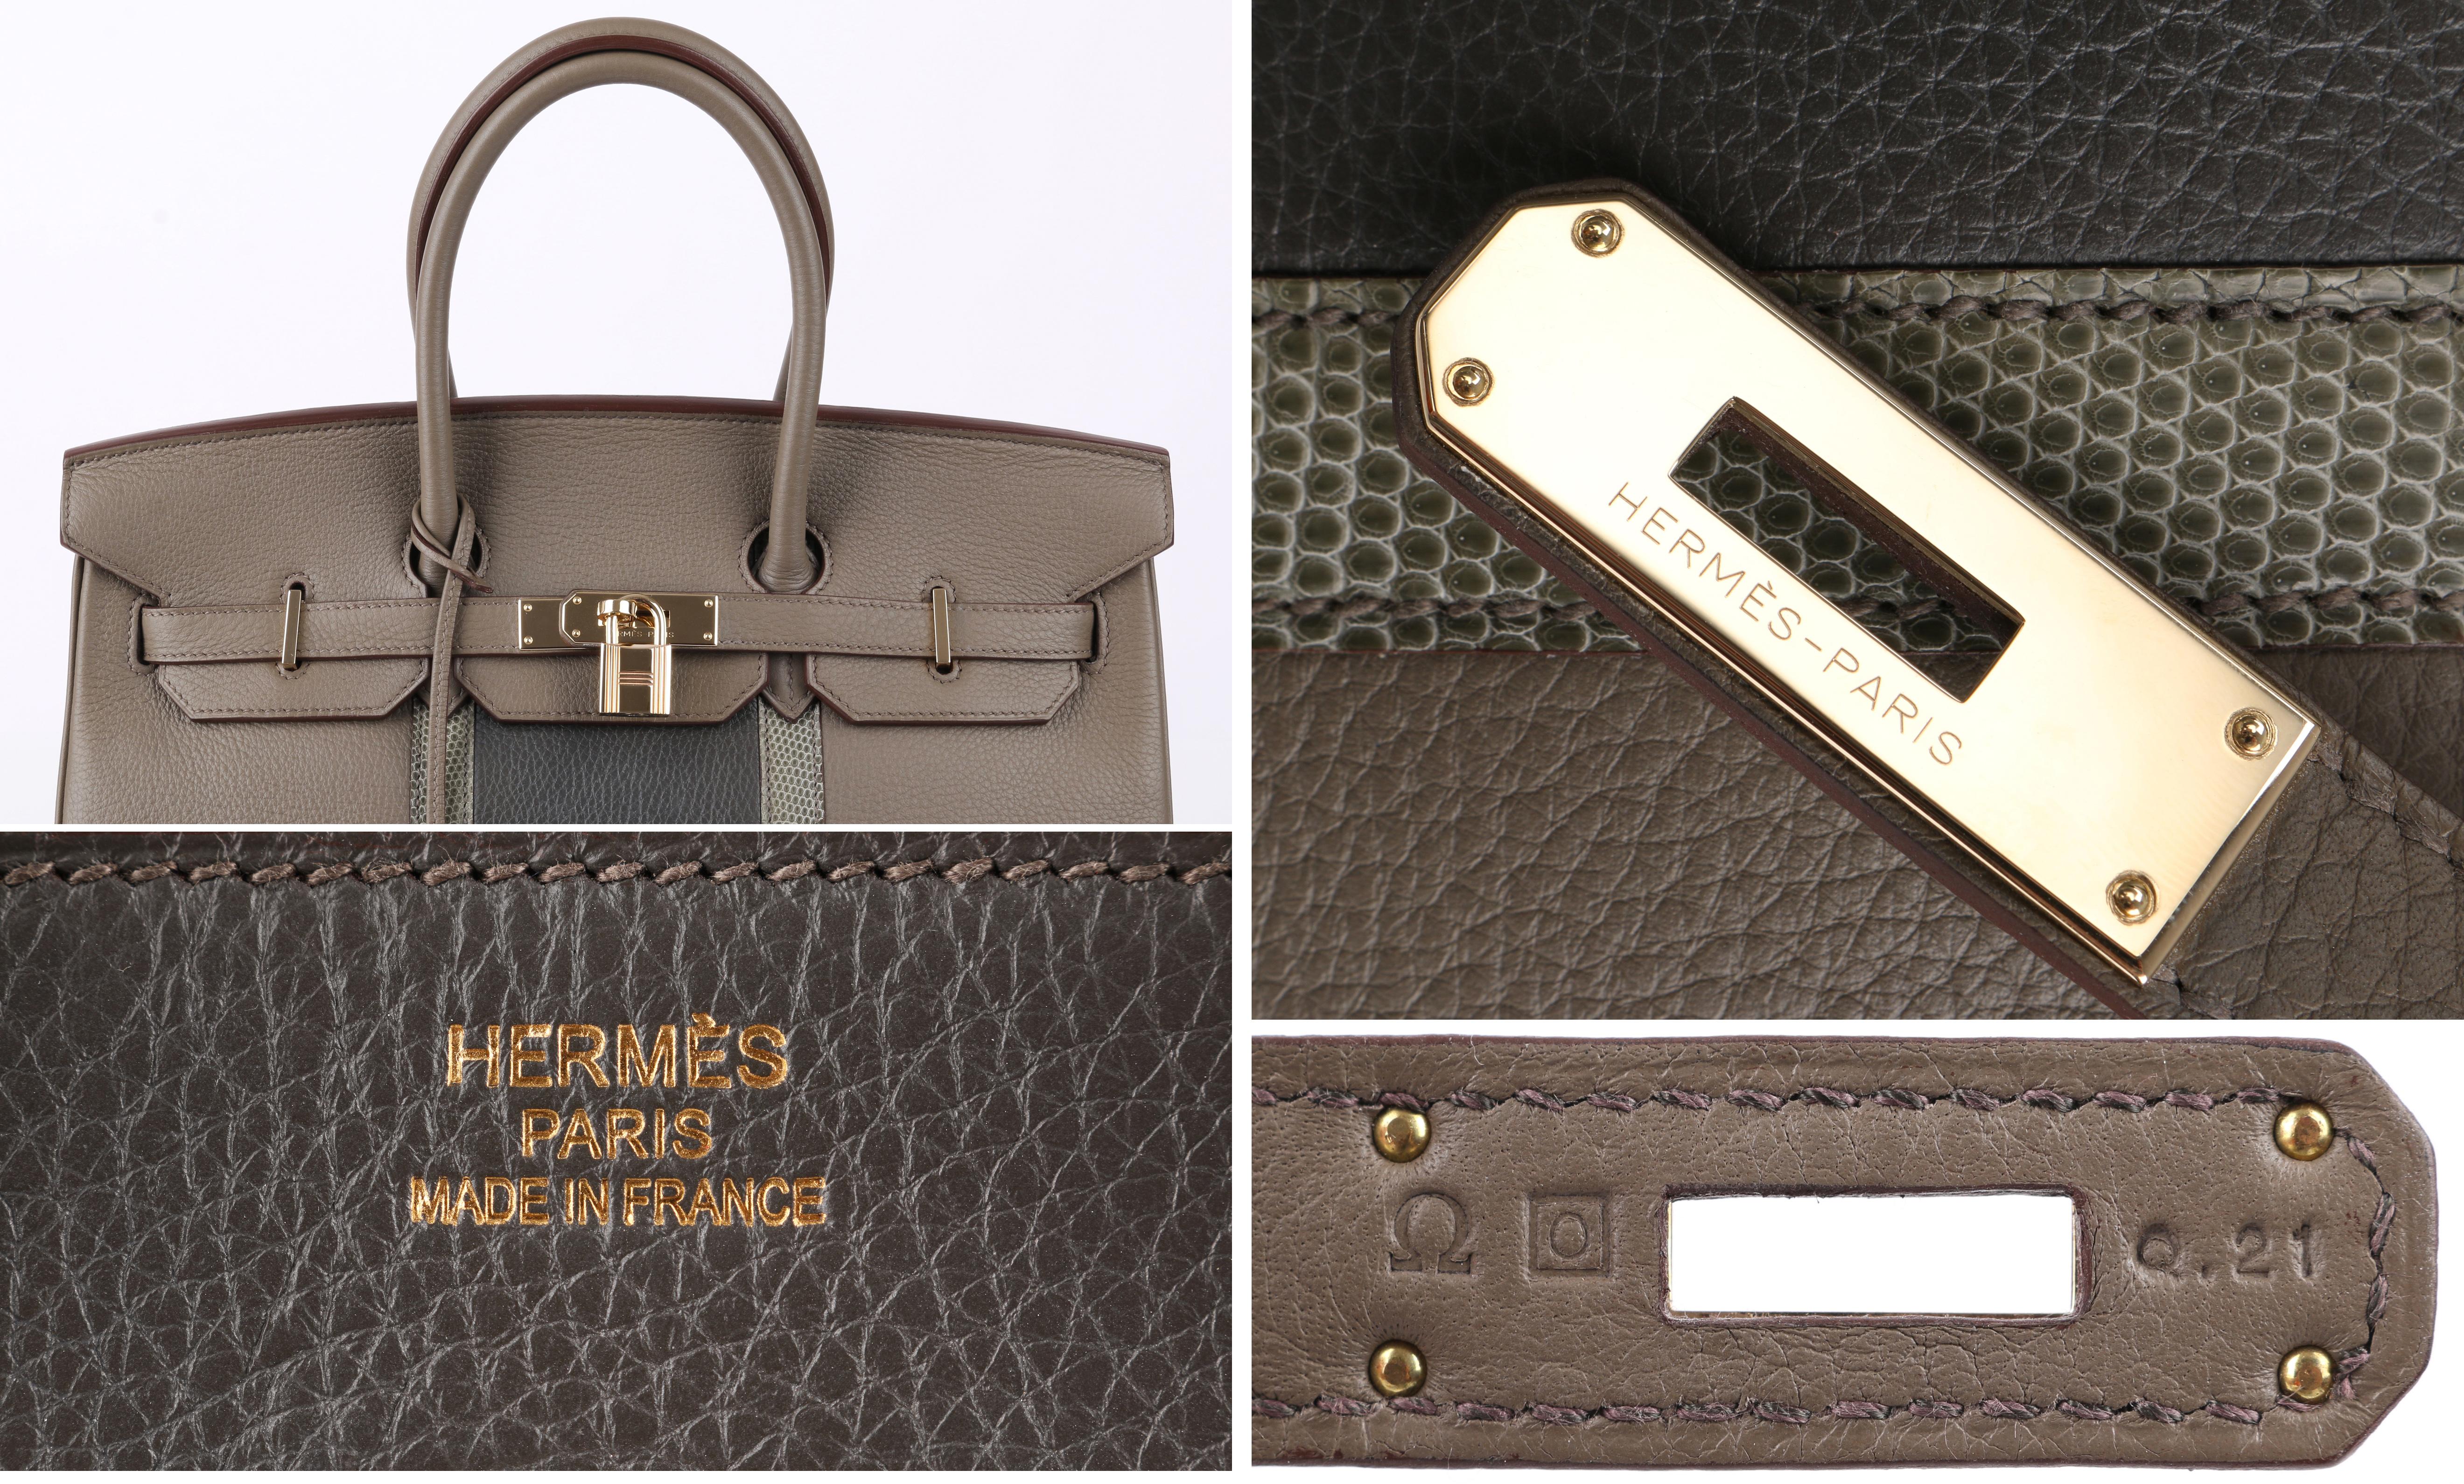 Hermès Limited Edition 2011 35cm Club Birkin handbag. The main body of the bag is Etain Clemence leather. The center panel is Graphite Clemence leather trimmed with Gris Fonce Lizard. Gold plated hardware with original lock (stamped 